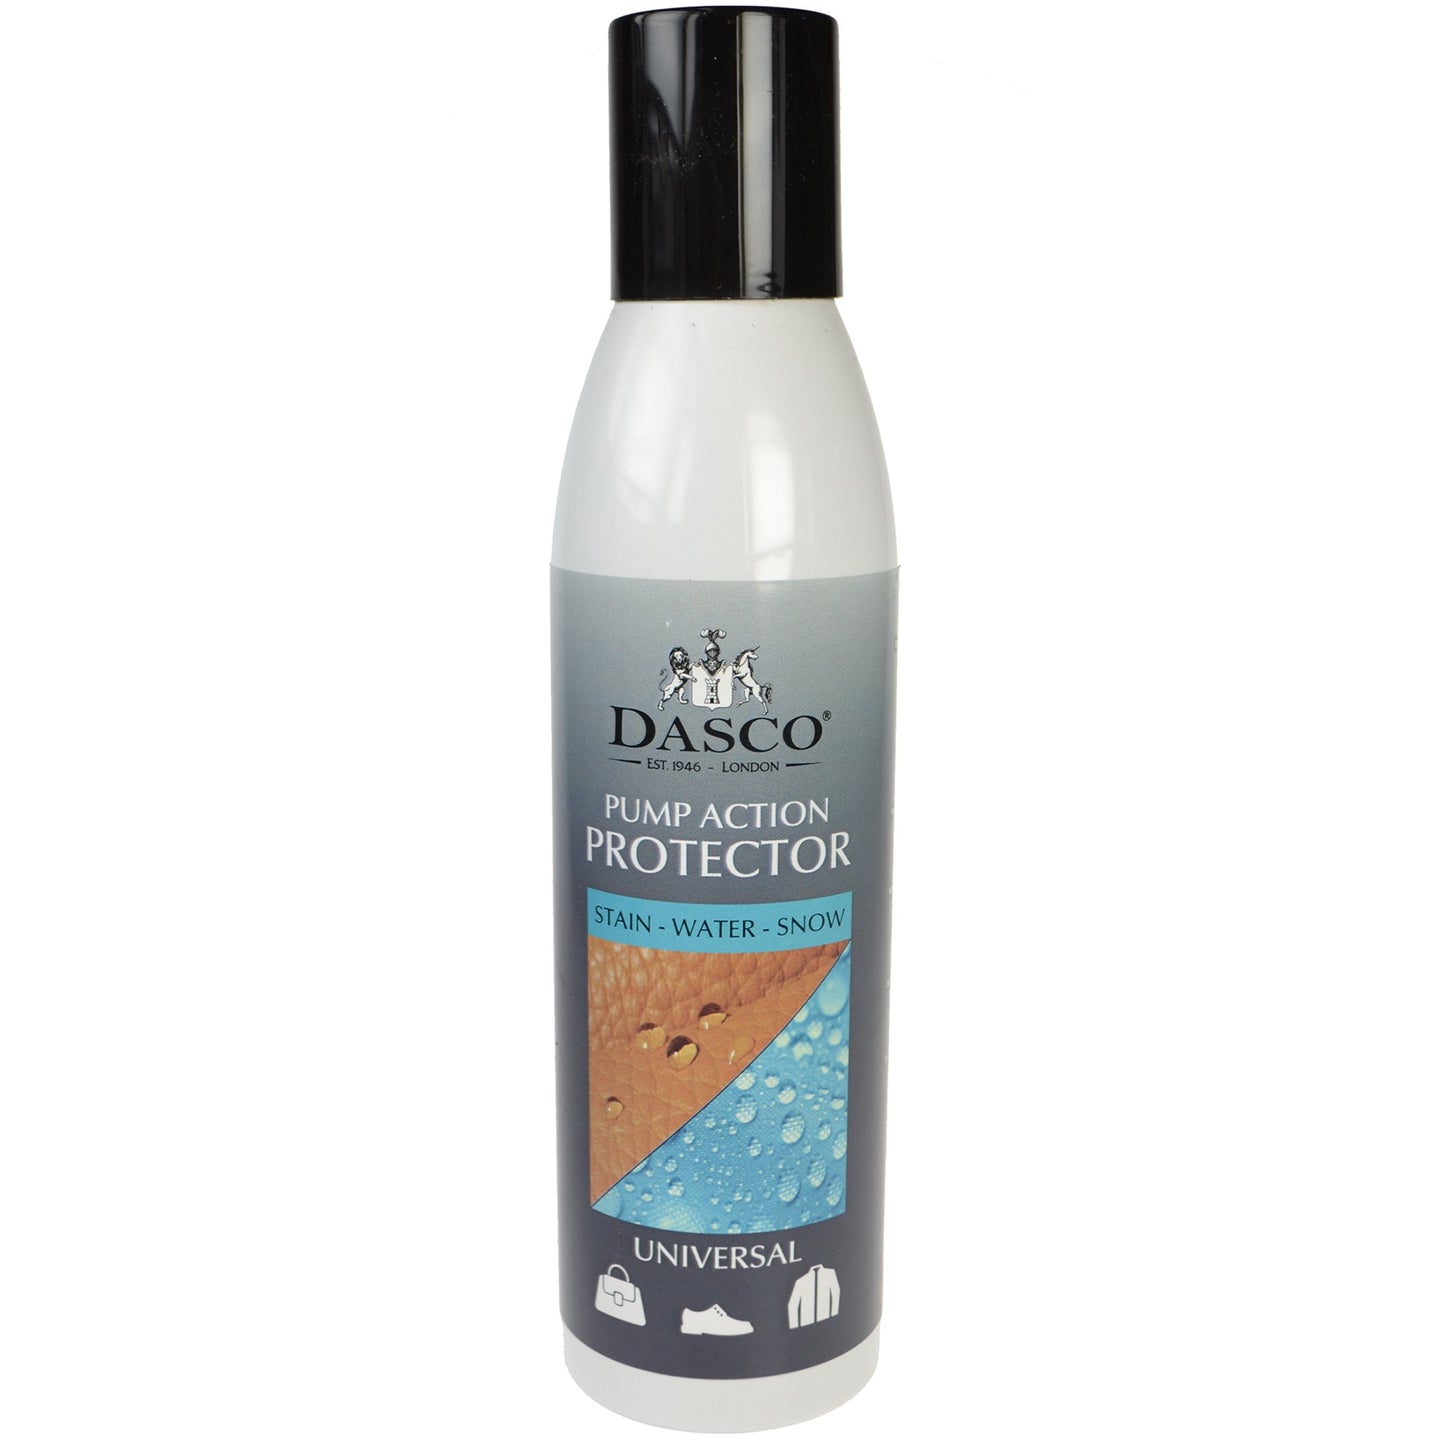 Dasco Stain Protector - Pump action, Solvent free, Vegan Friendly